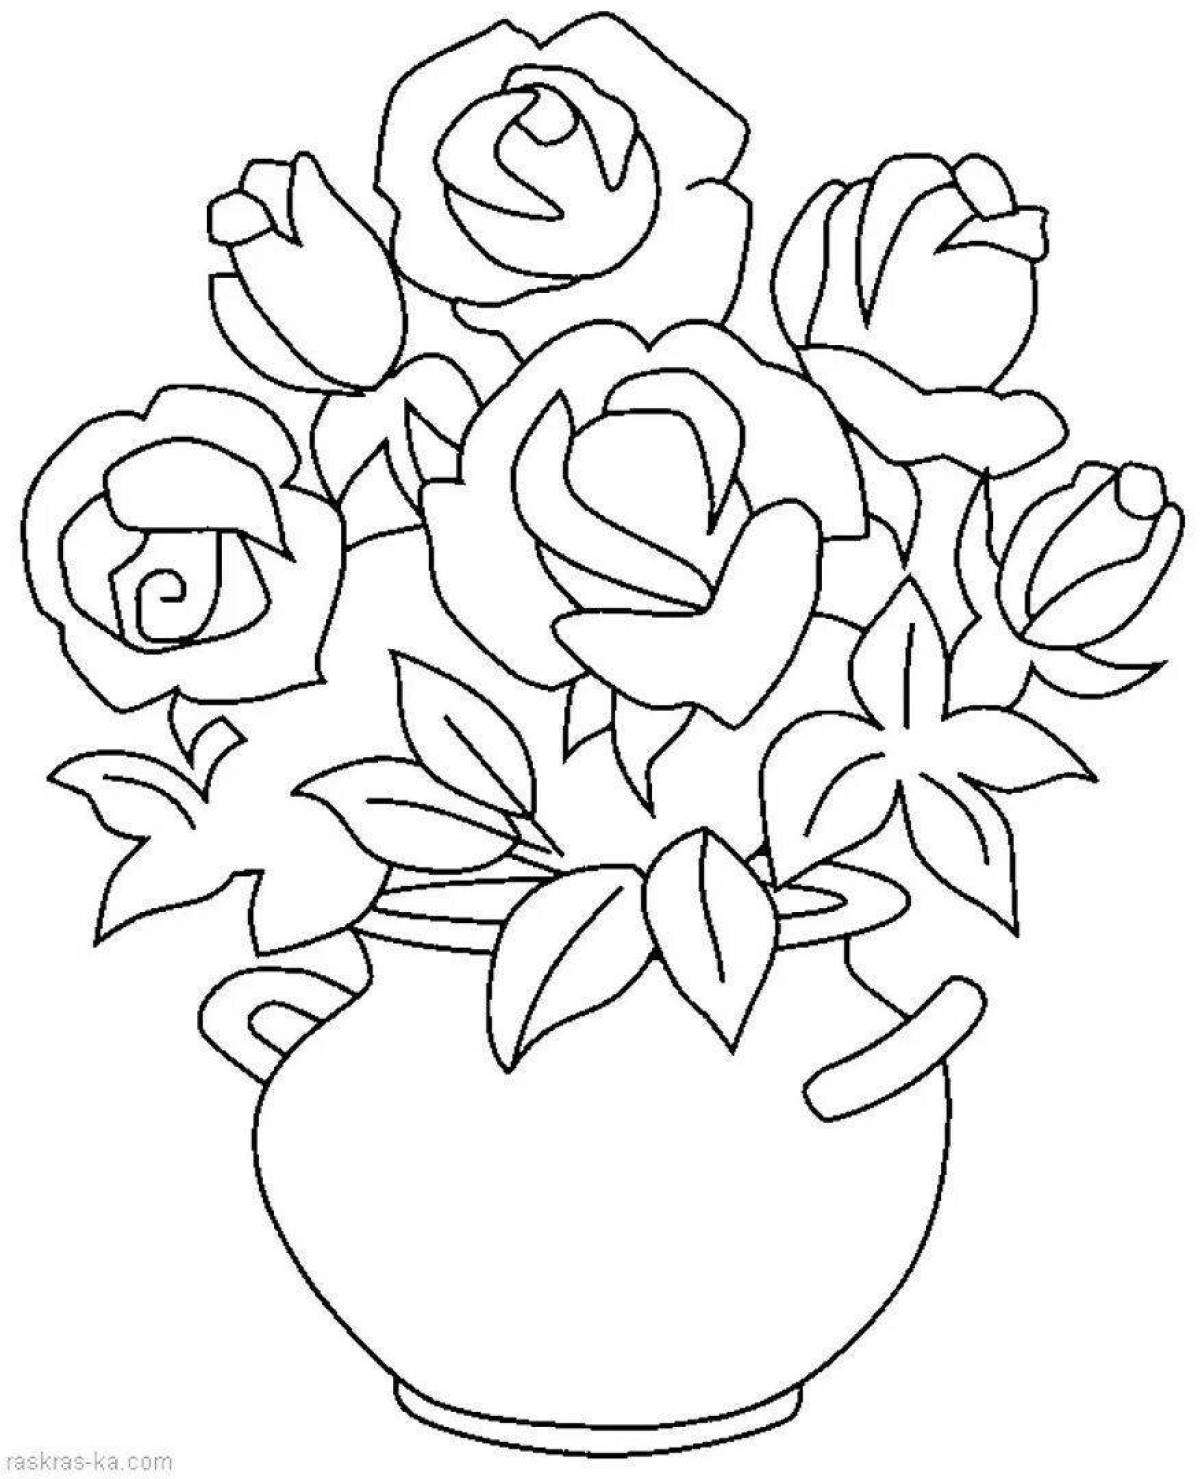 Coloring page playful bouquet in a vase